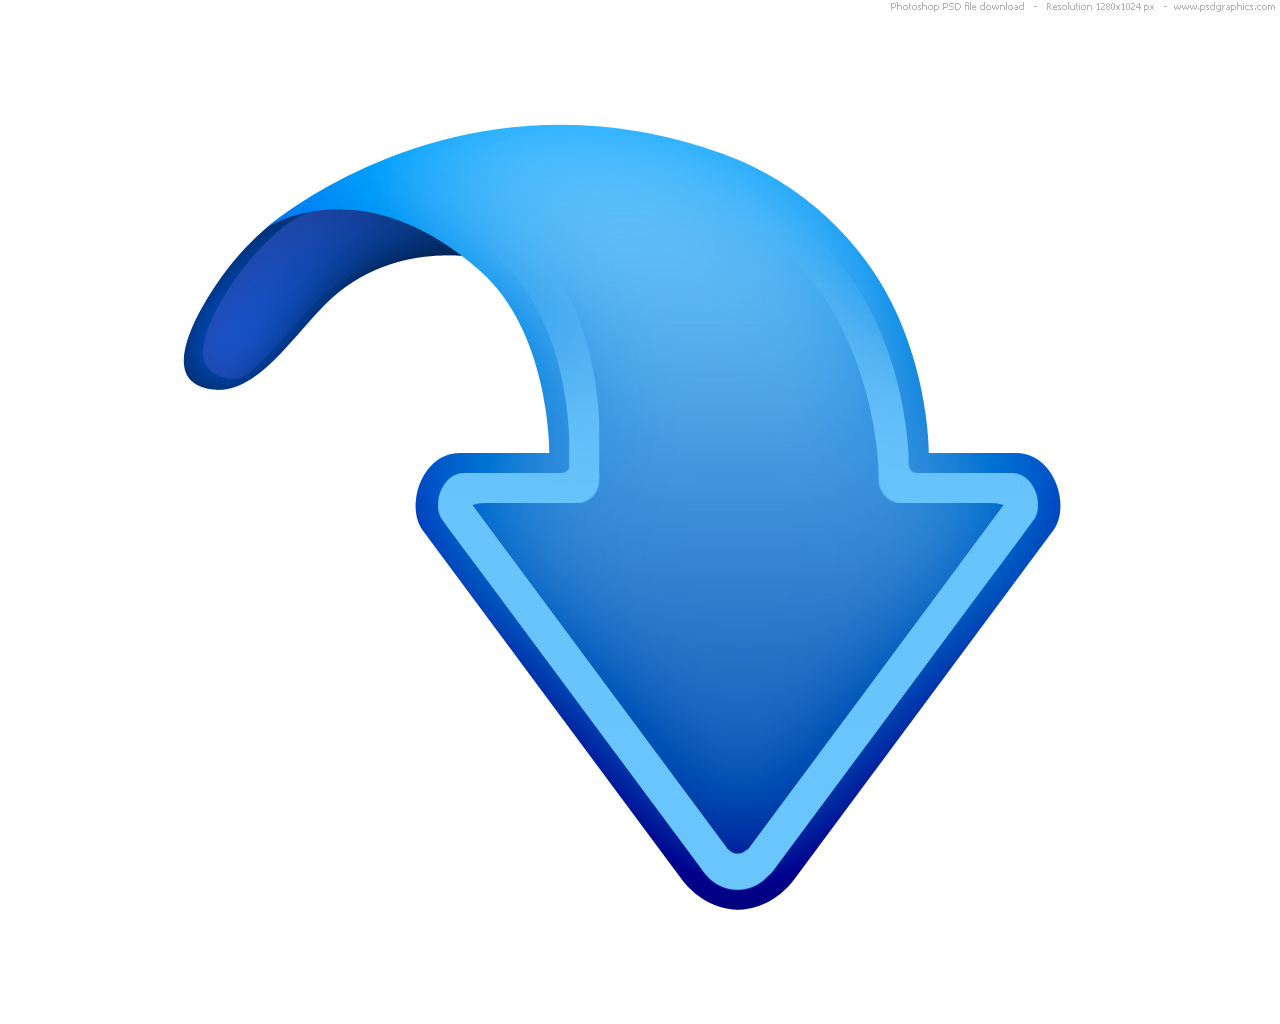 Up, down, left and right arrows, blue web icons | PSDGraphics